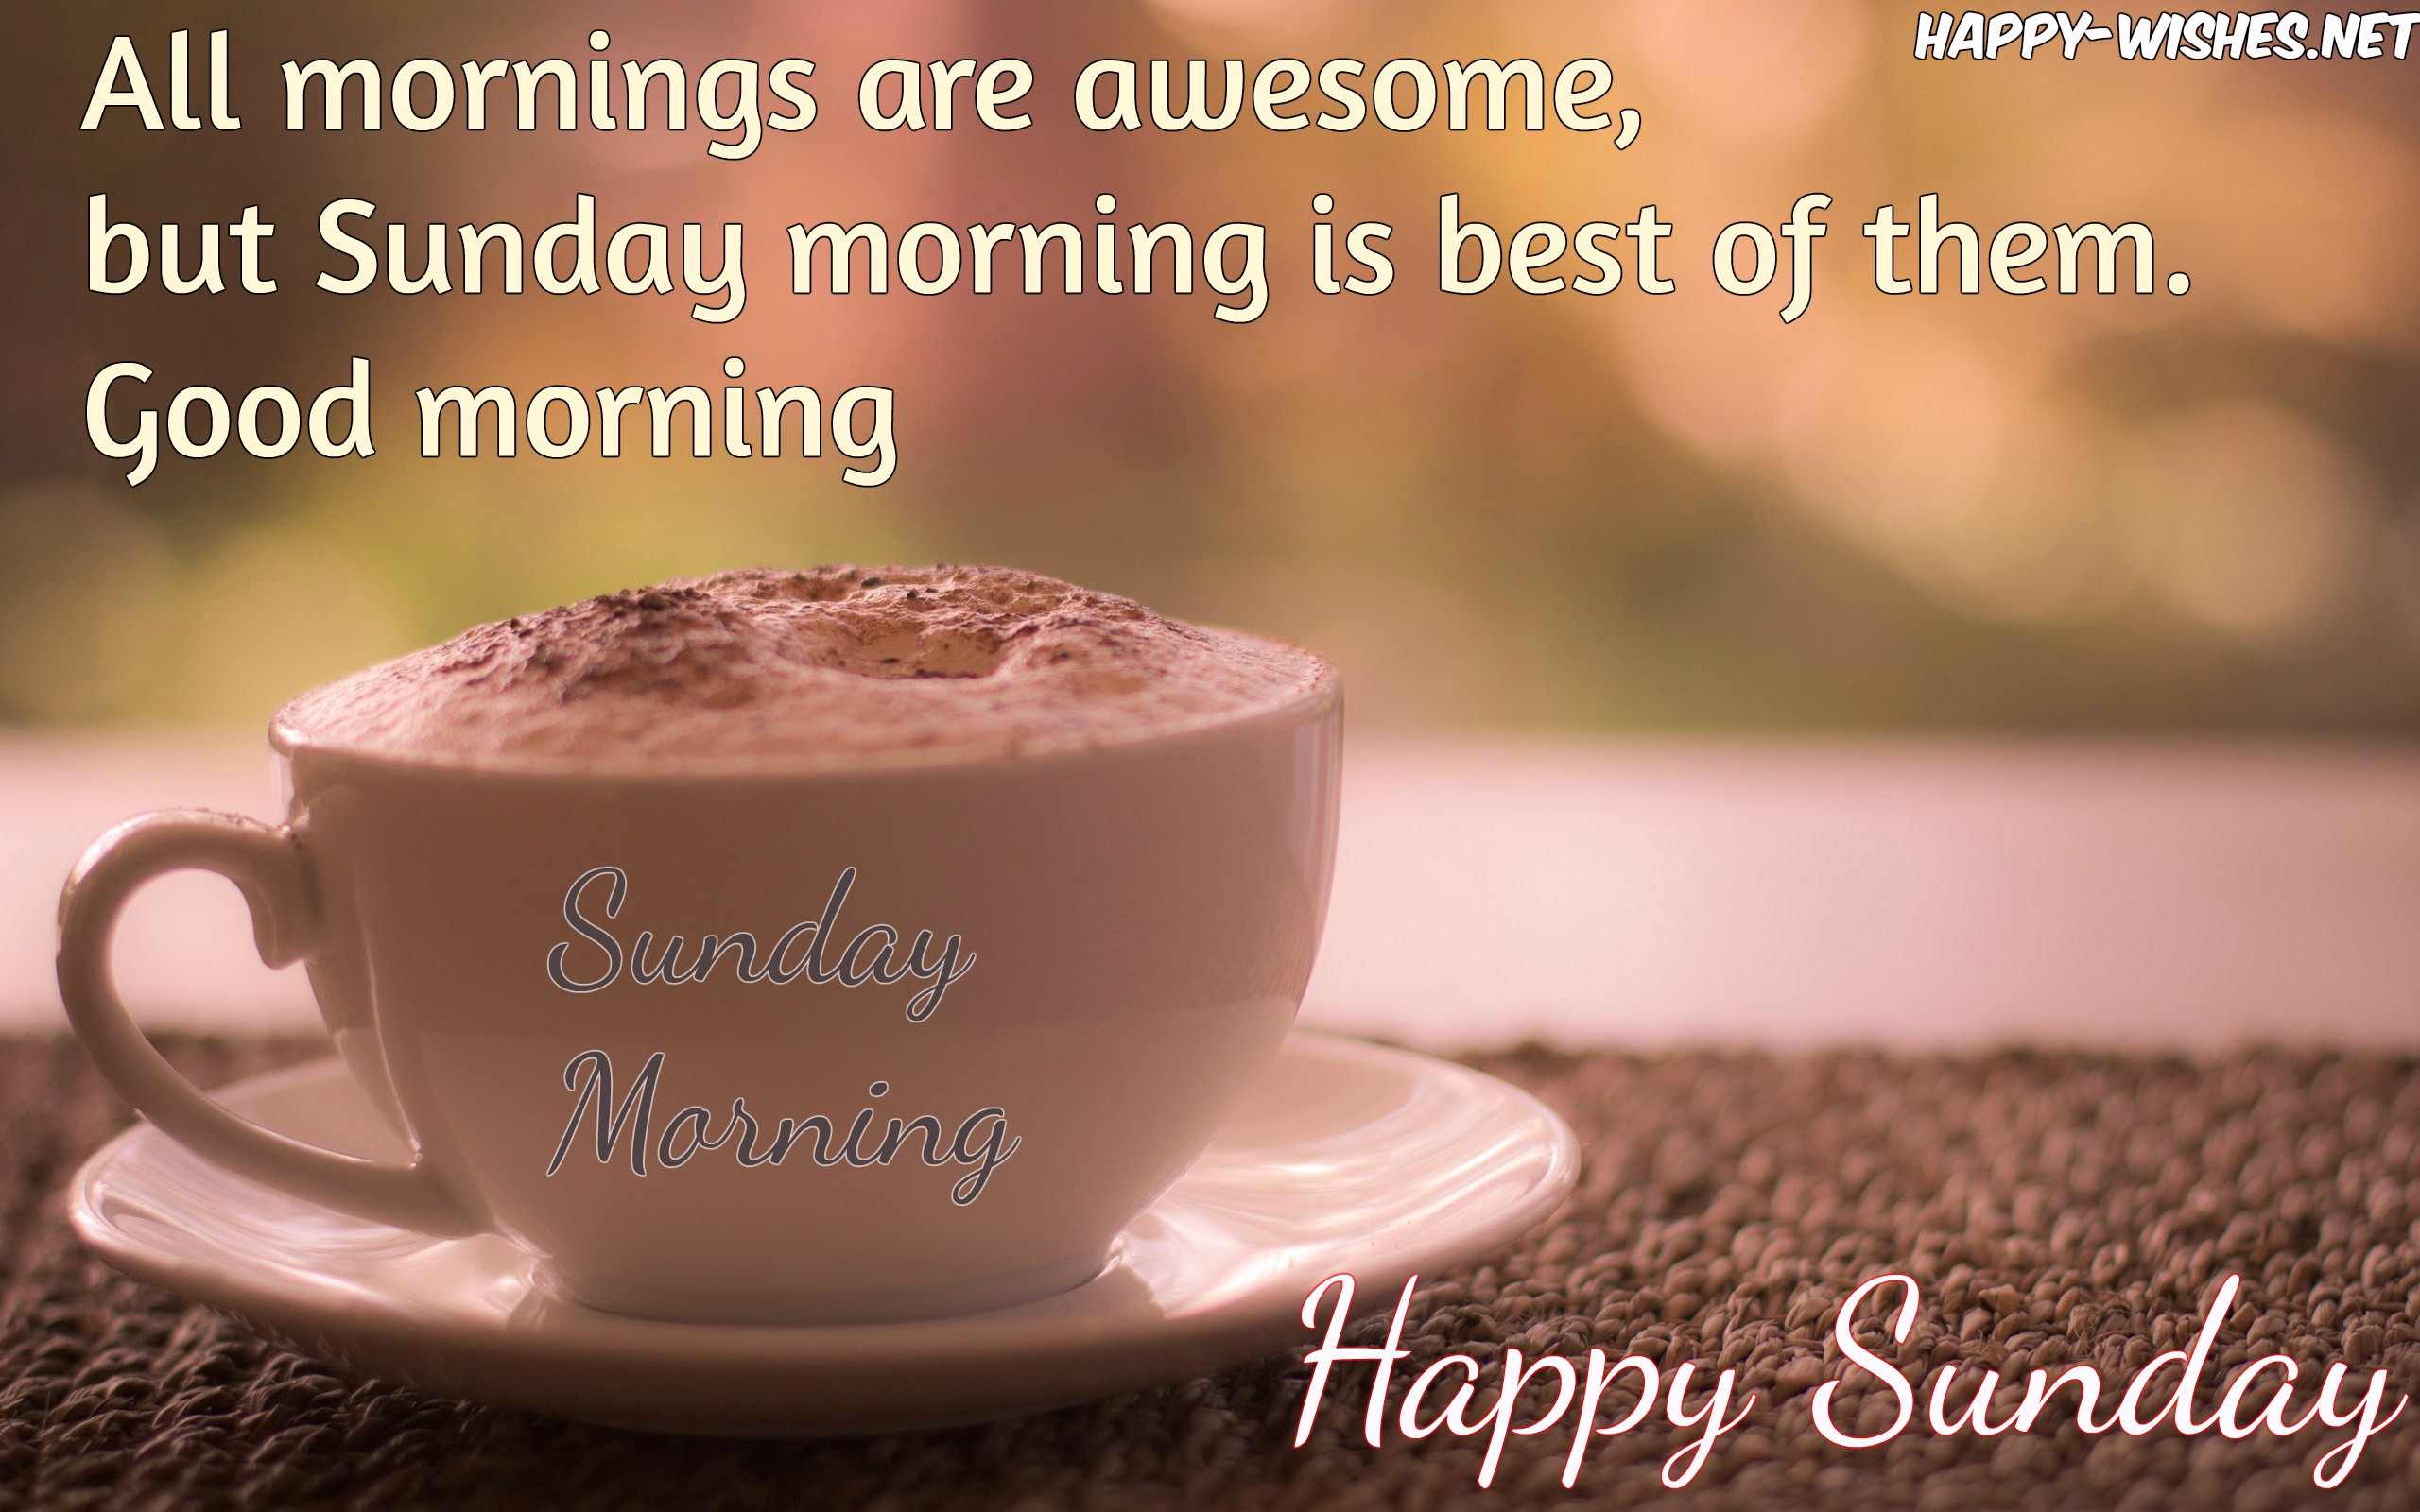 Good morning wishes on sunday quotes